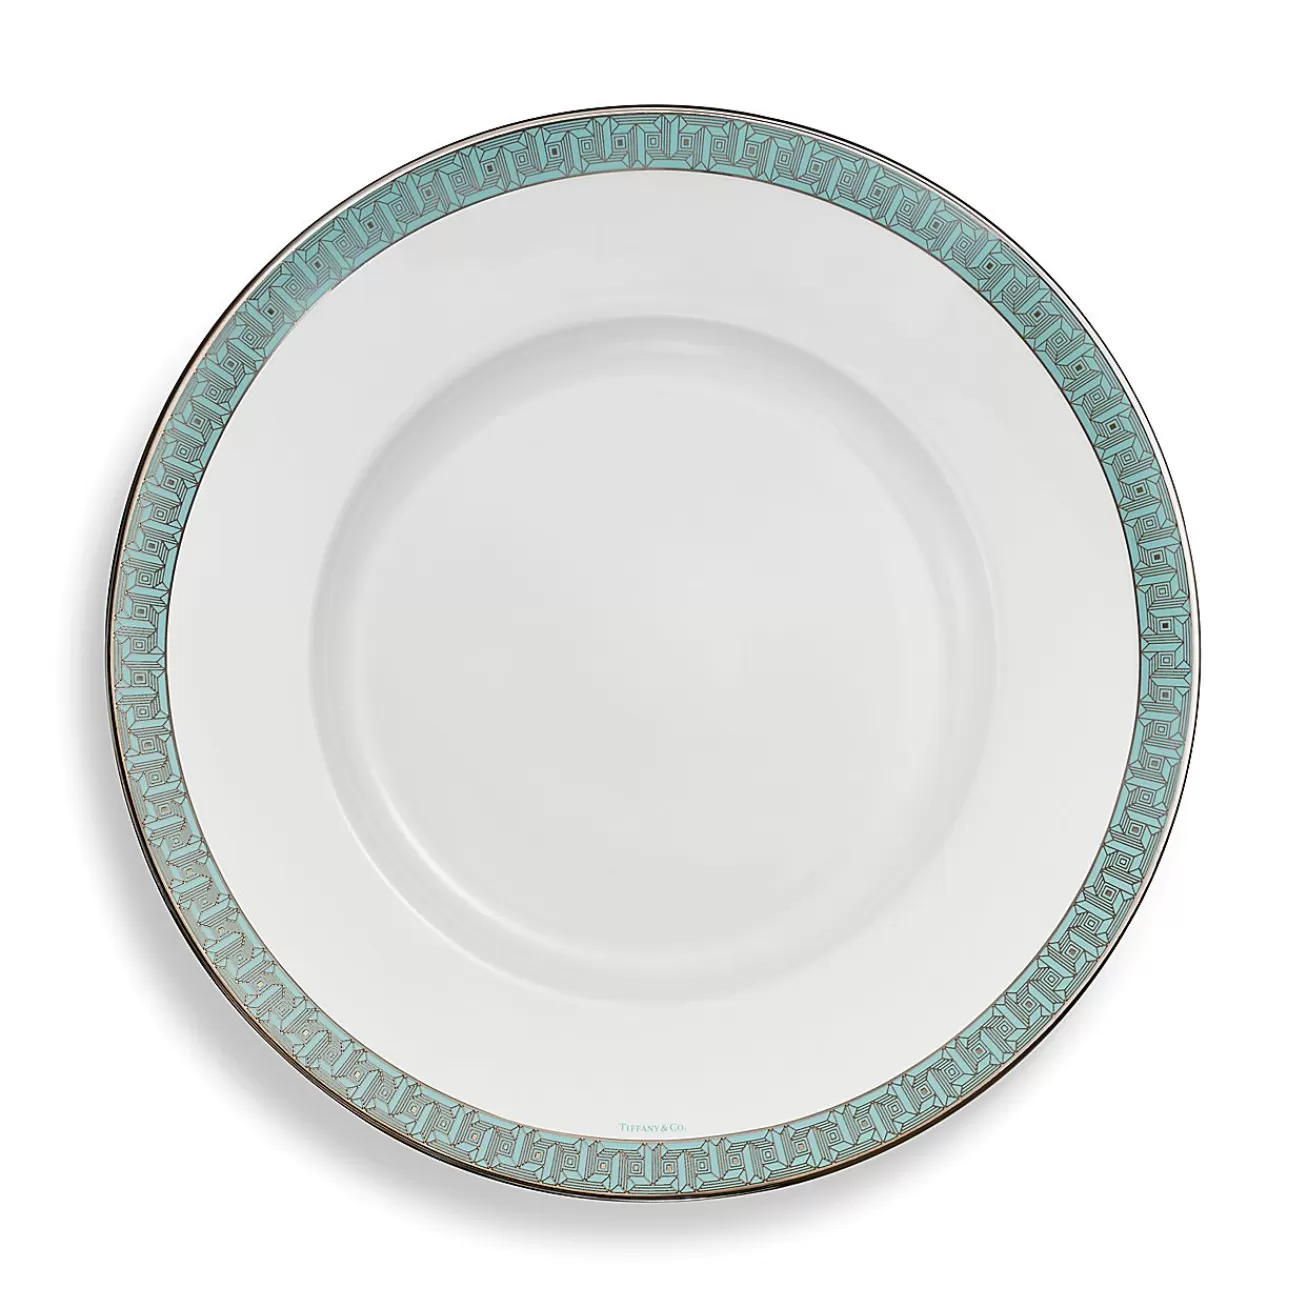 Tiffany & Co. Tiffany T True Charger with a Hand-painted Platinum Rim | ^ The Home | Housewarming Gifts